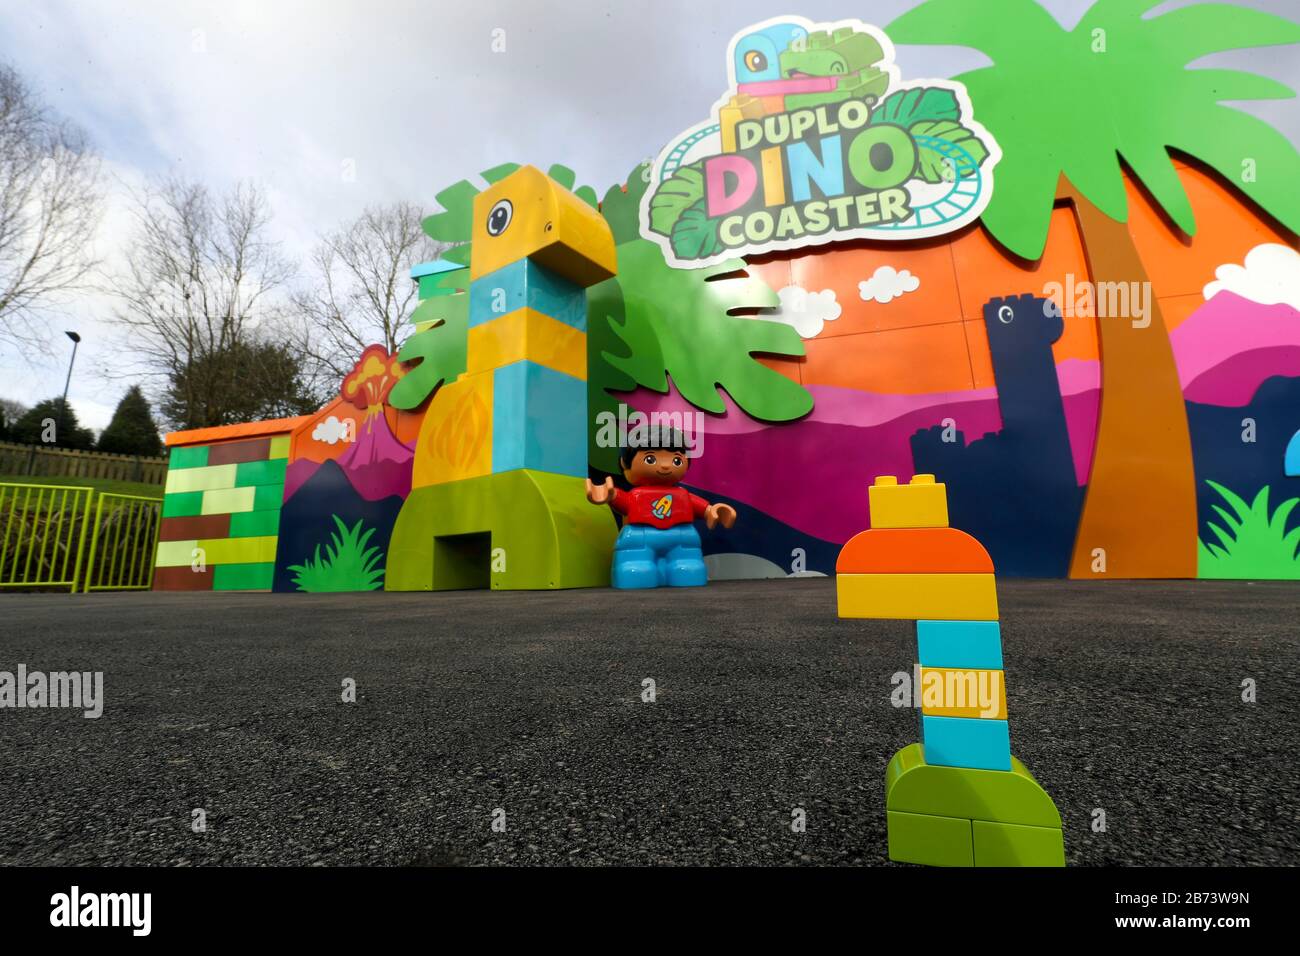 Finishing touches are made to the world's first DUPLO Dino coaster at LEGOLAND Windsor Resort, Berkshire, as part of a makeover of the bigger and better DUPLO Valley land which opens to the public on Saturday 14 March. Stock Photo